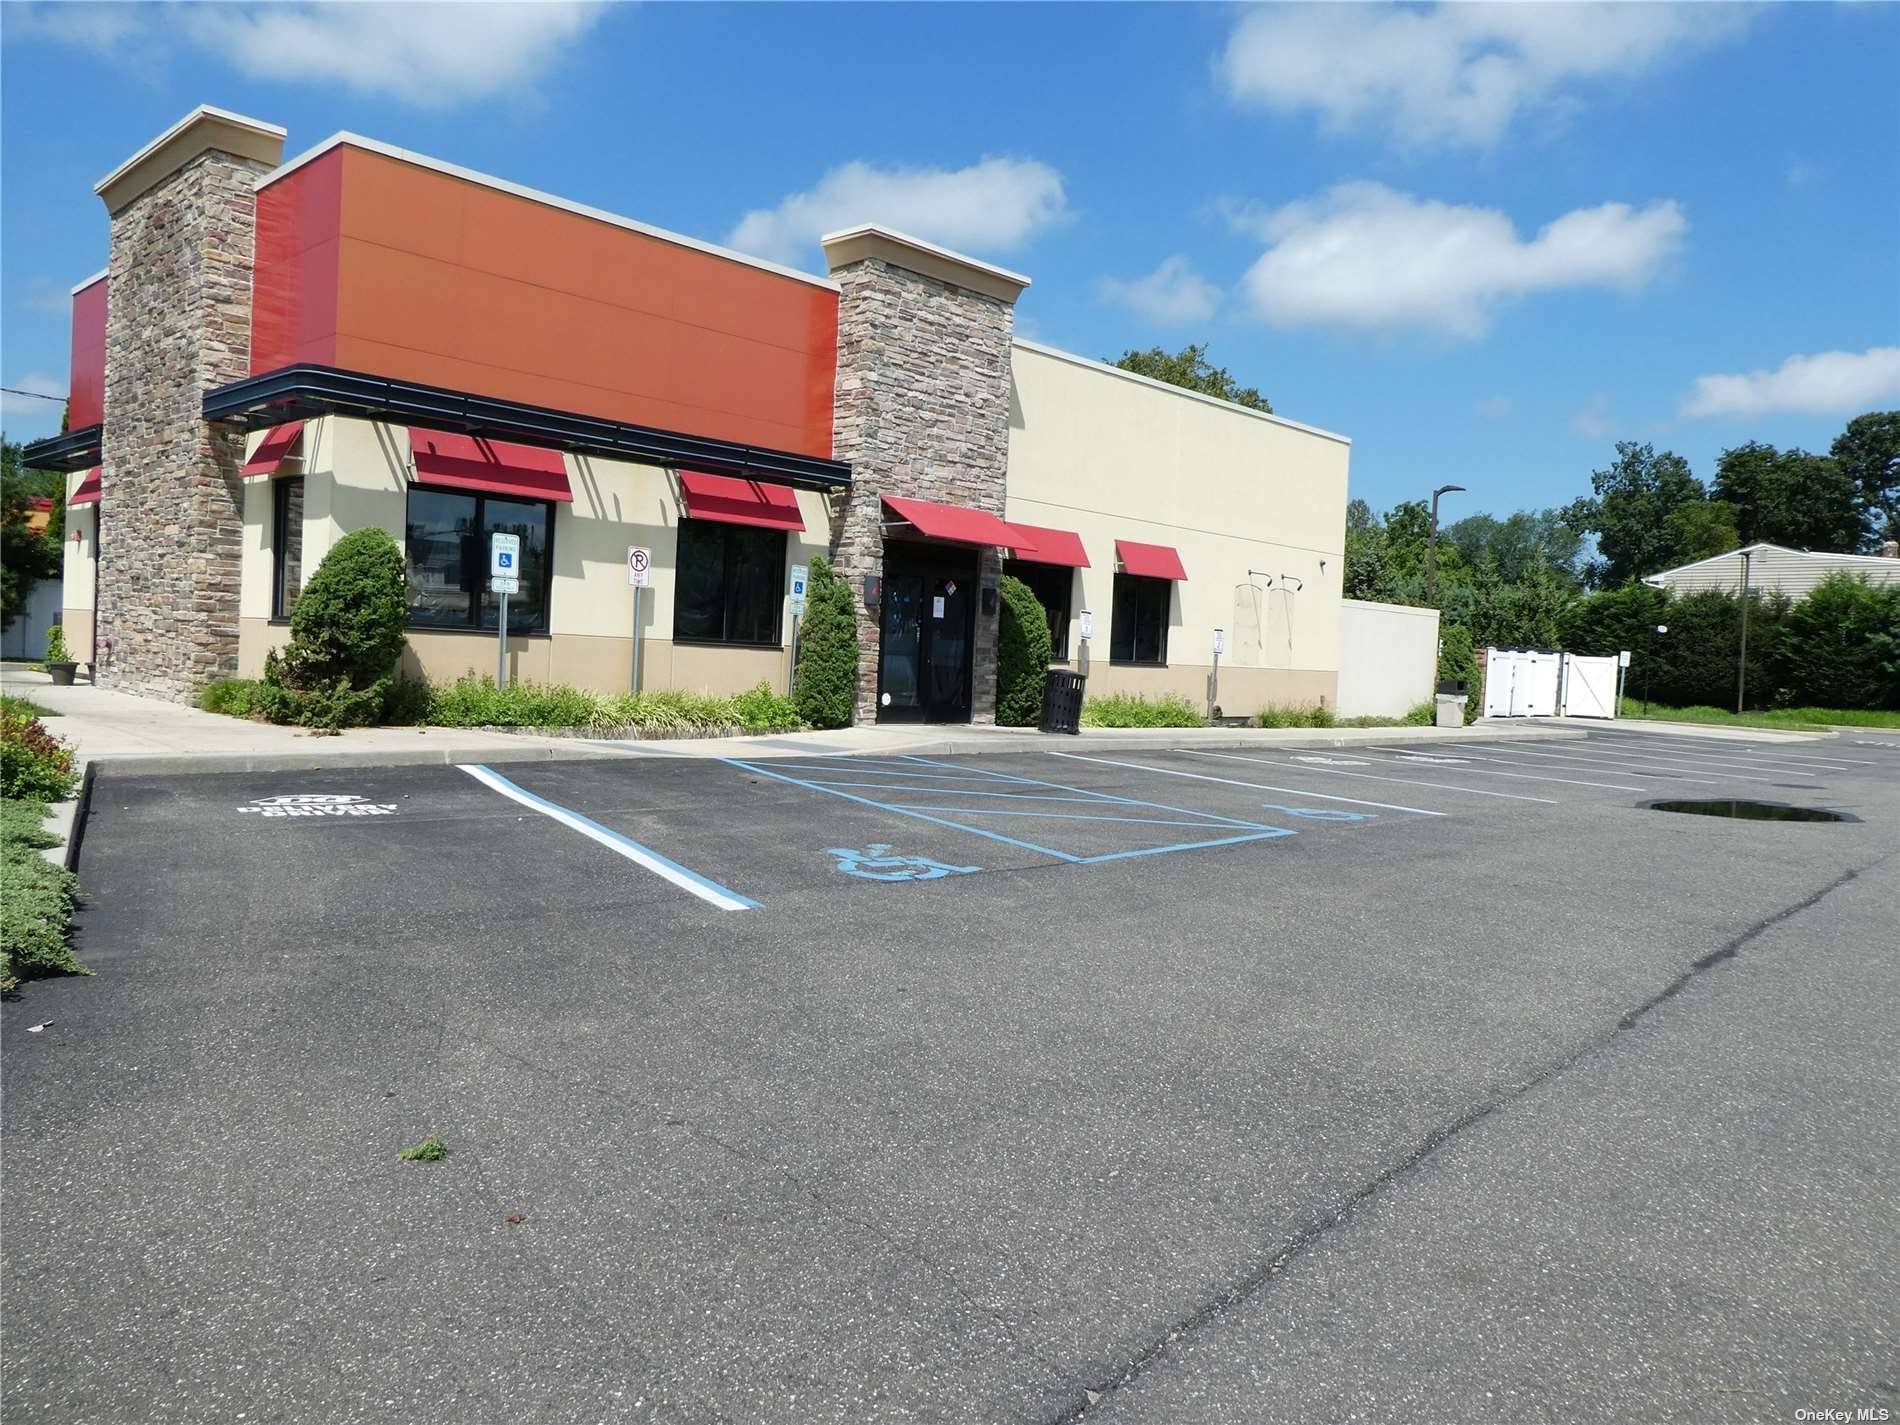 Welcome to an exceptional opportunity for a fast food franchise in a prime location.